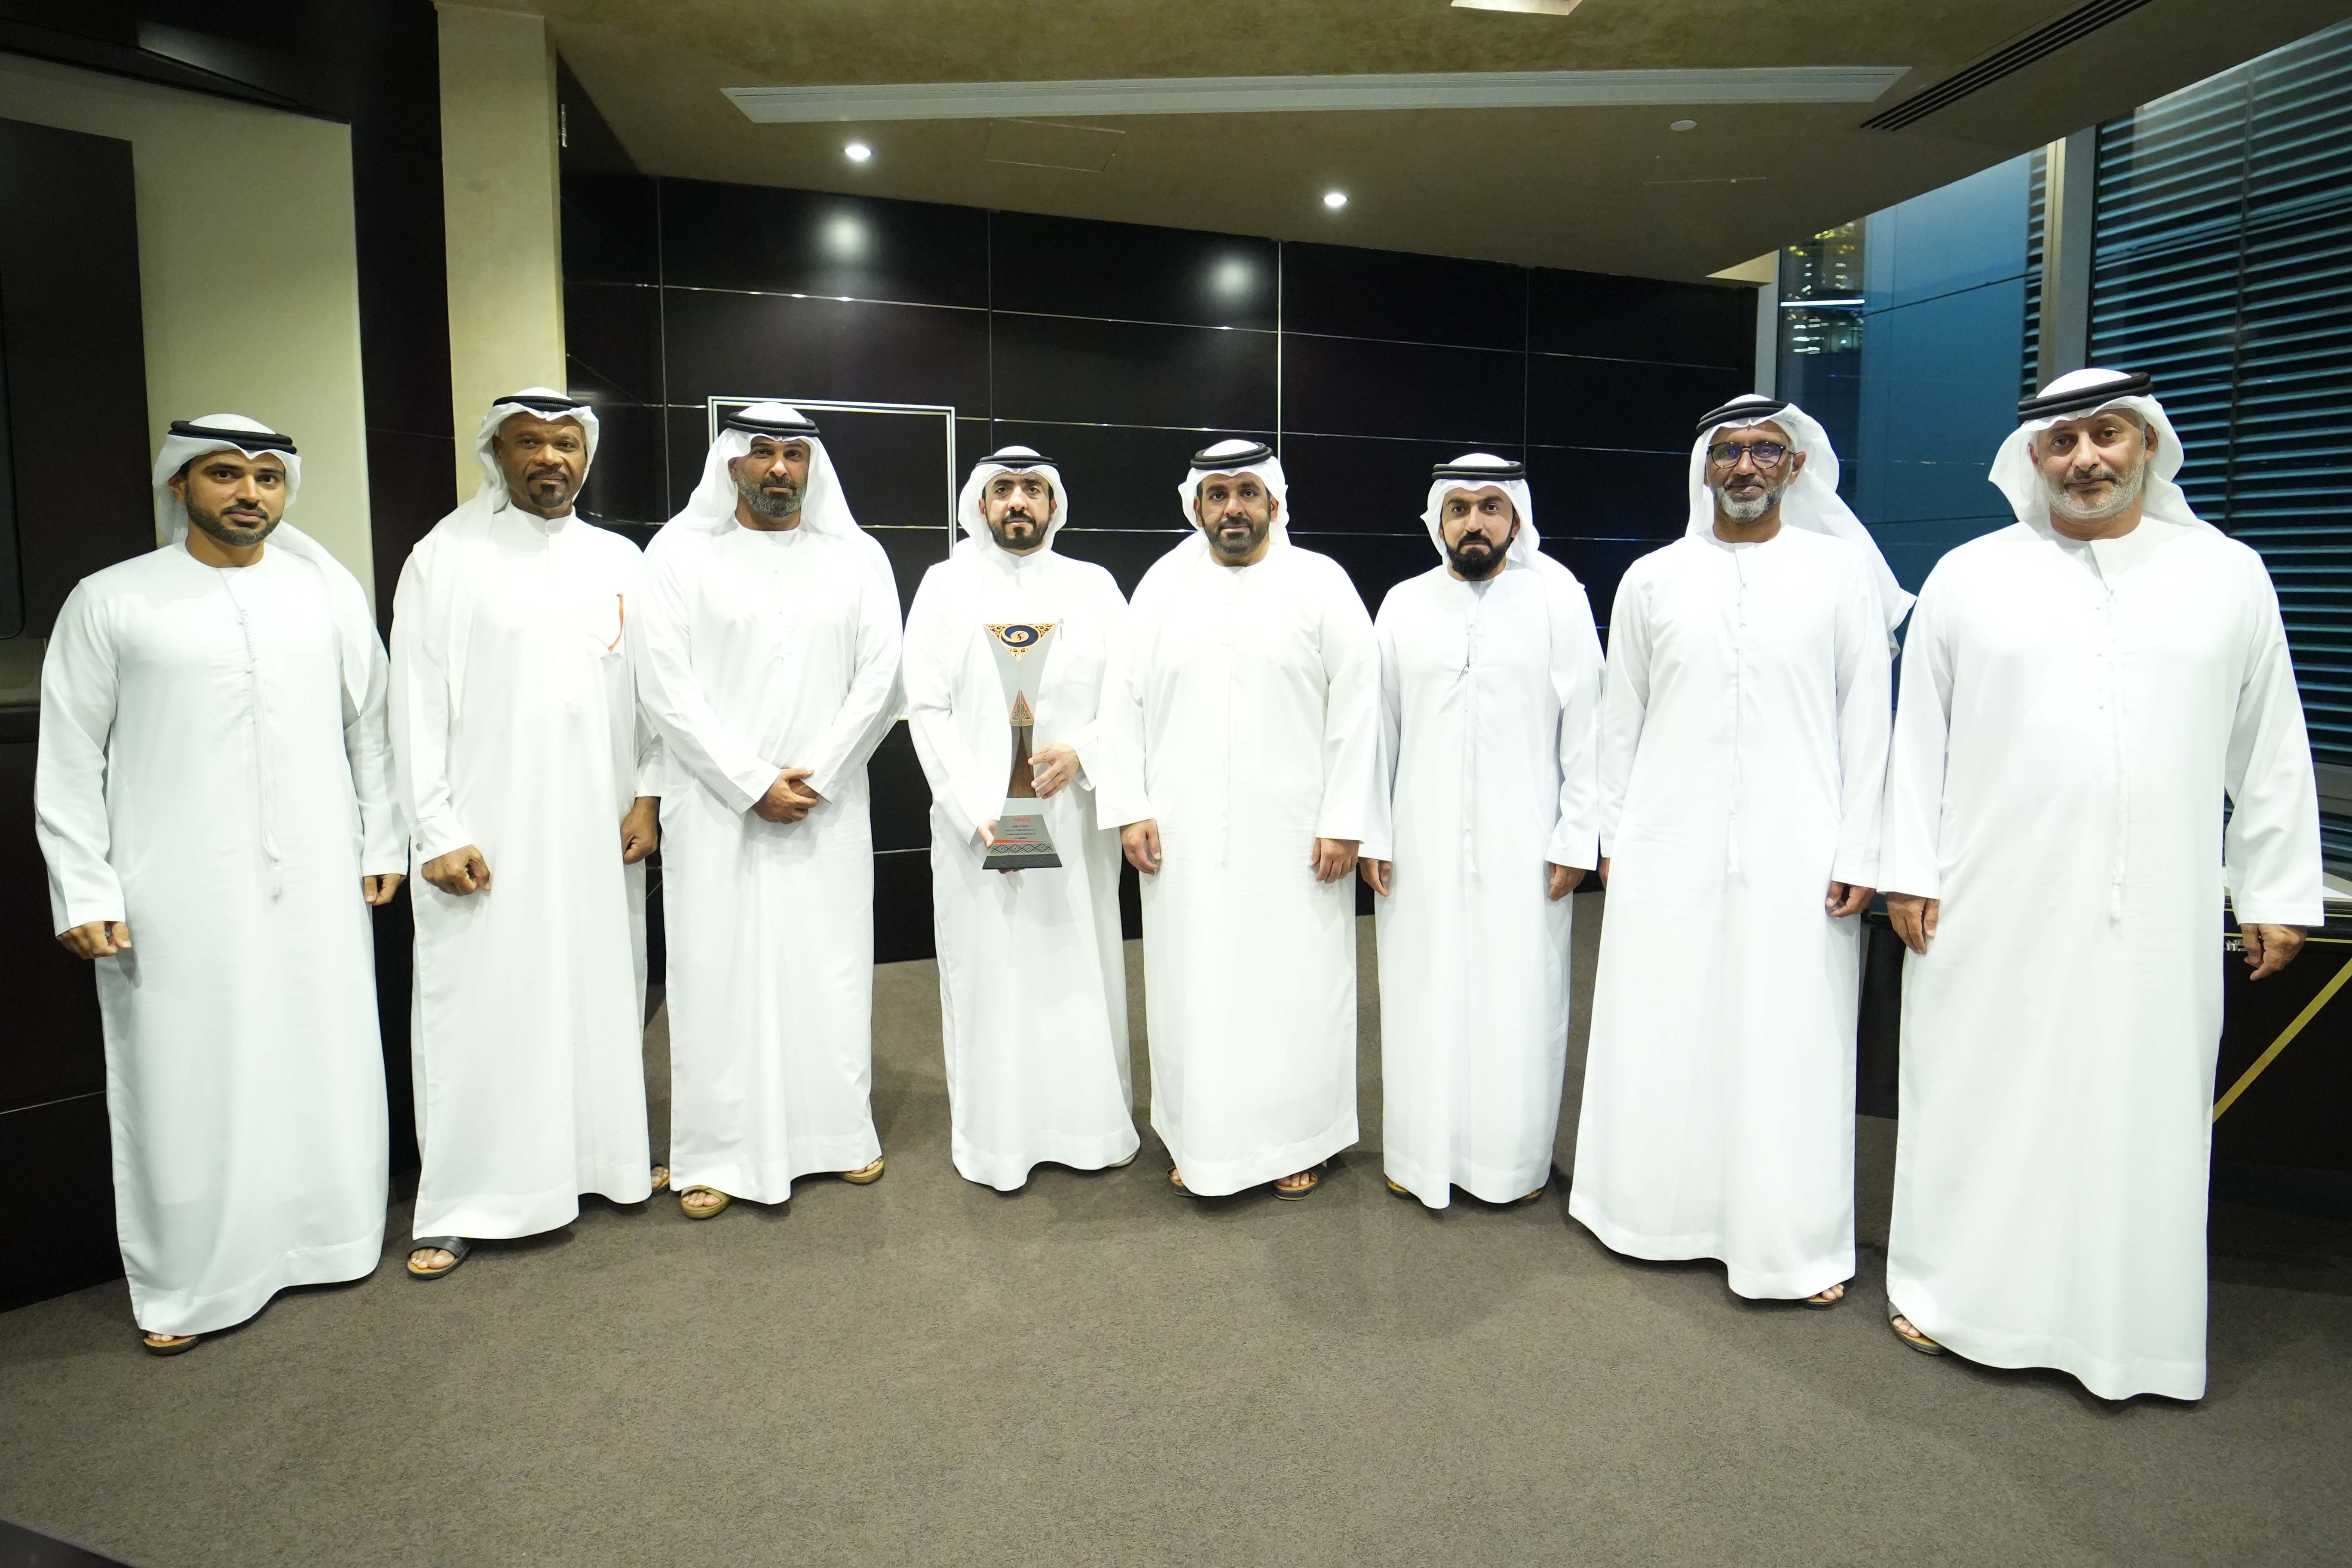 DIMC Applauds Victory Team's Participation and Accomplishments at Boat Show